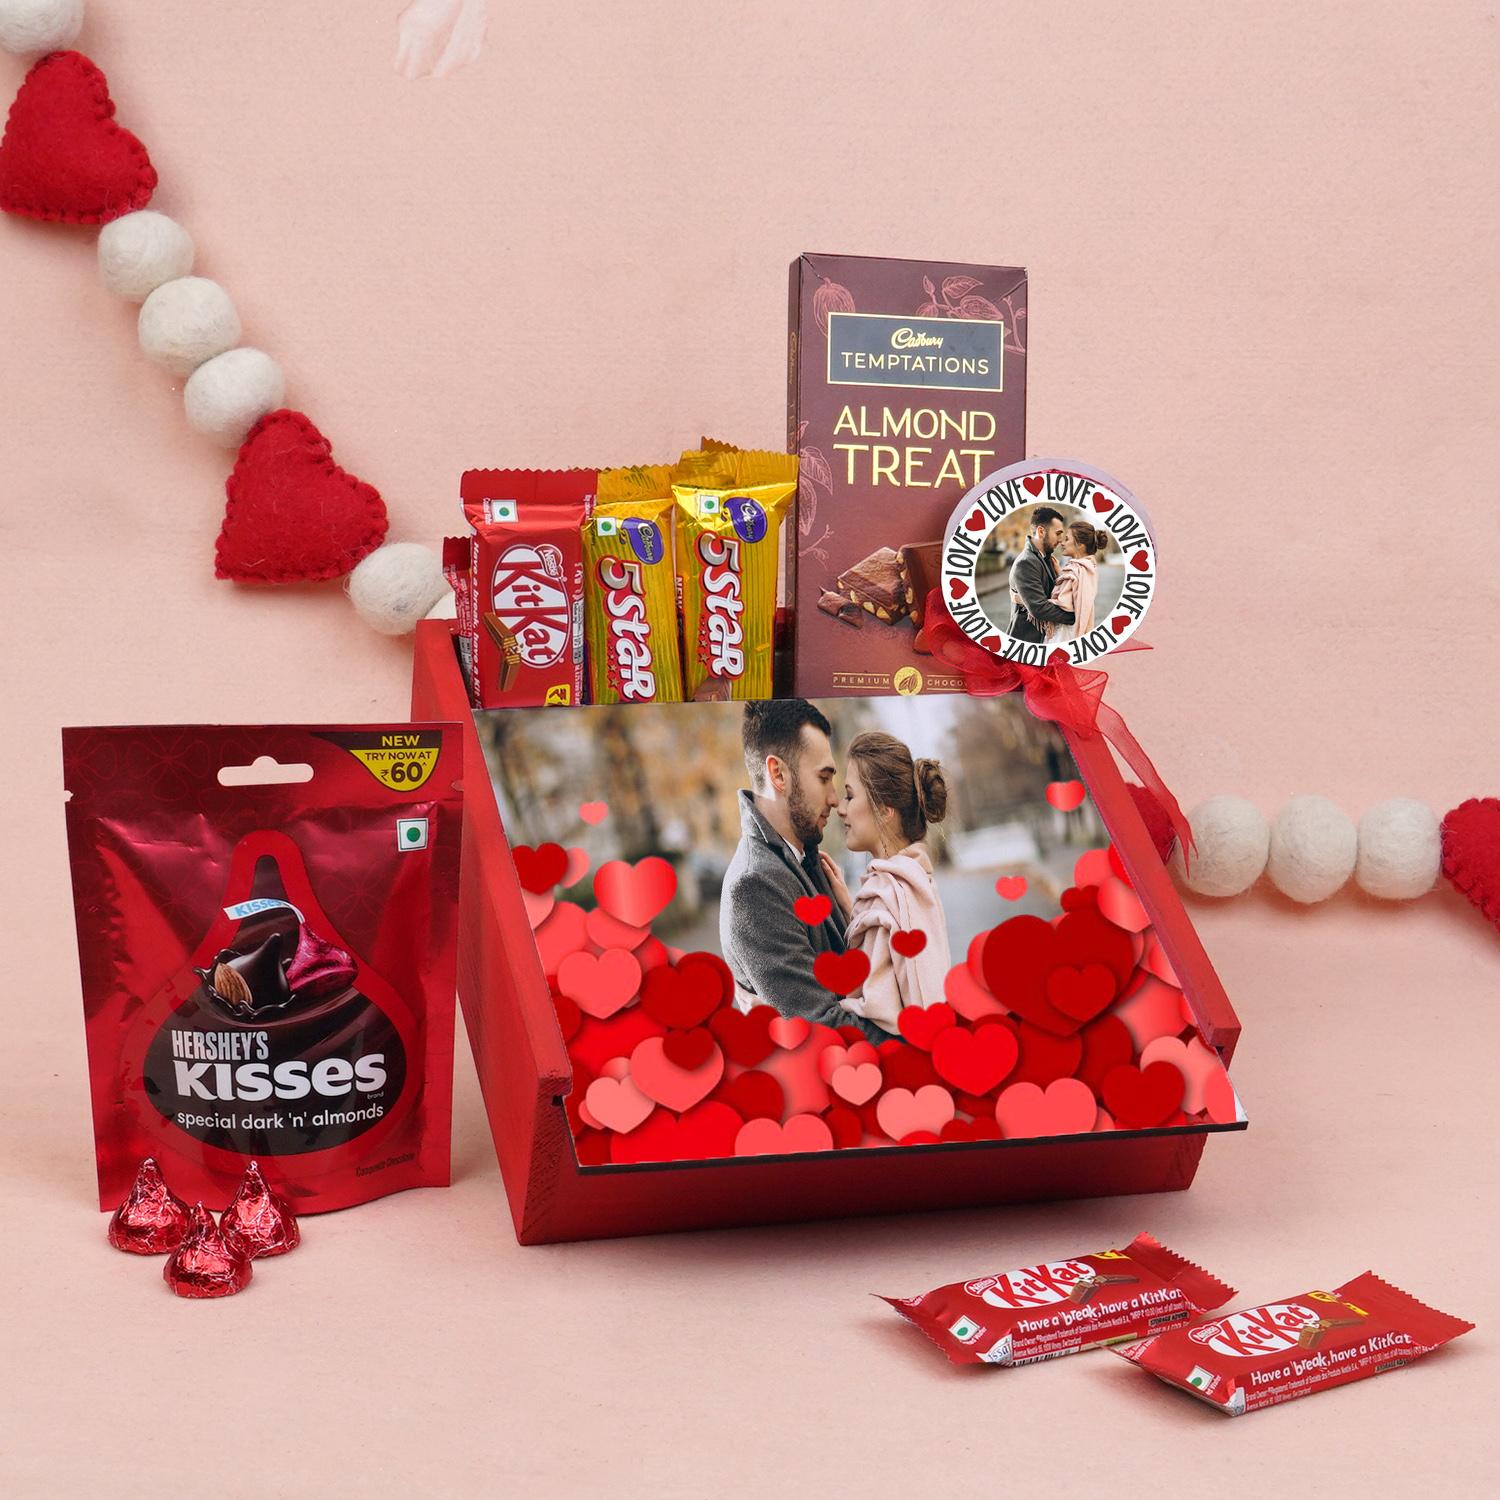 Cost of loving: Valentine's Day ideas that won't break the bank |  Valentine's Day | The Guardian